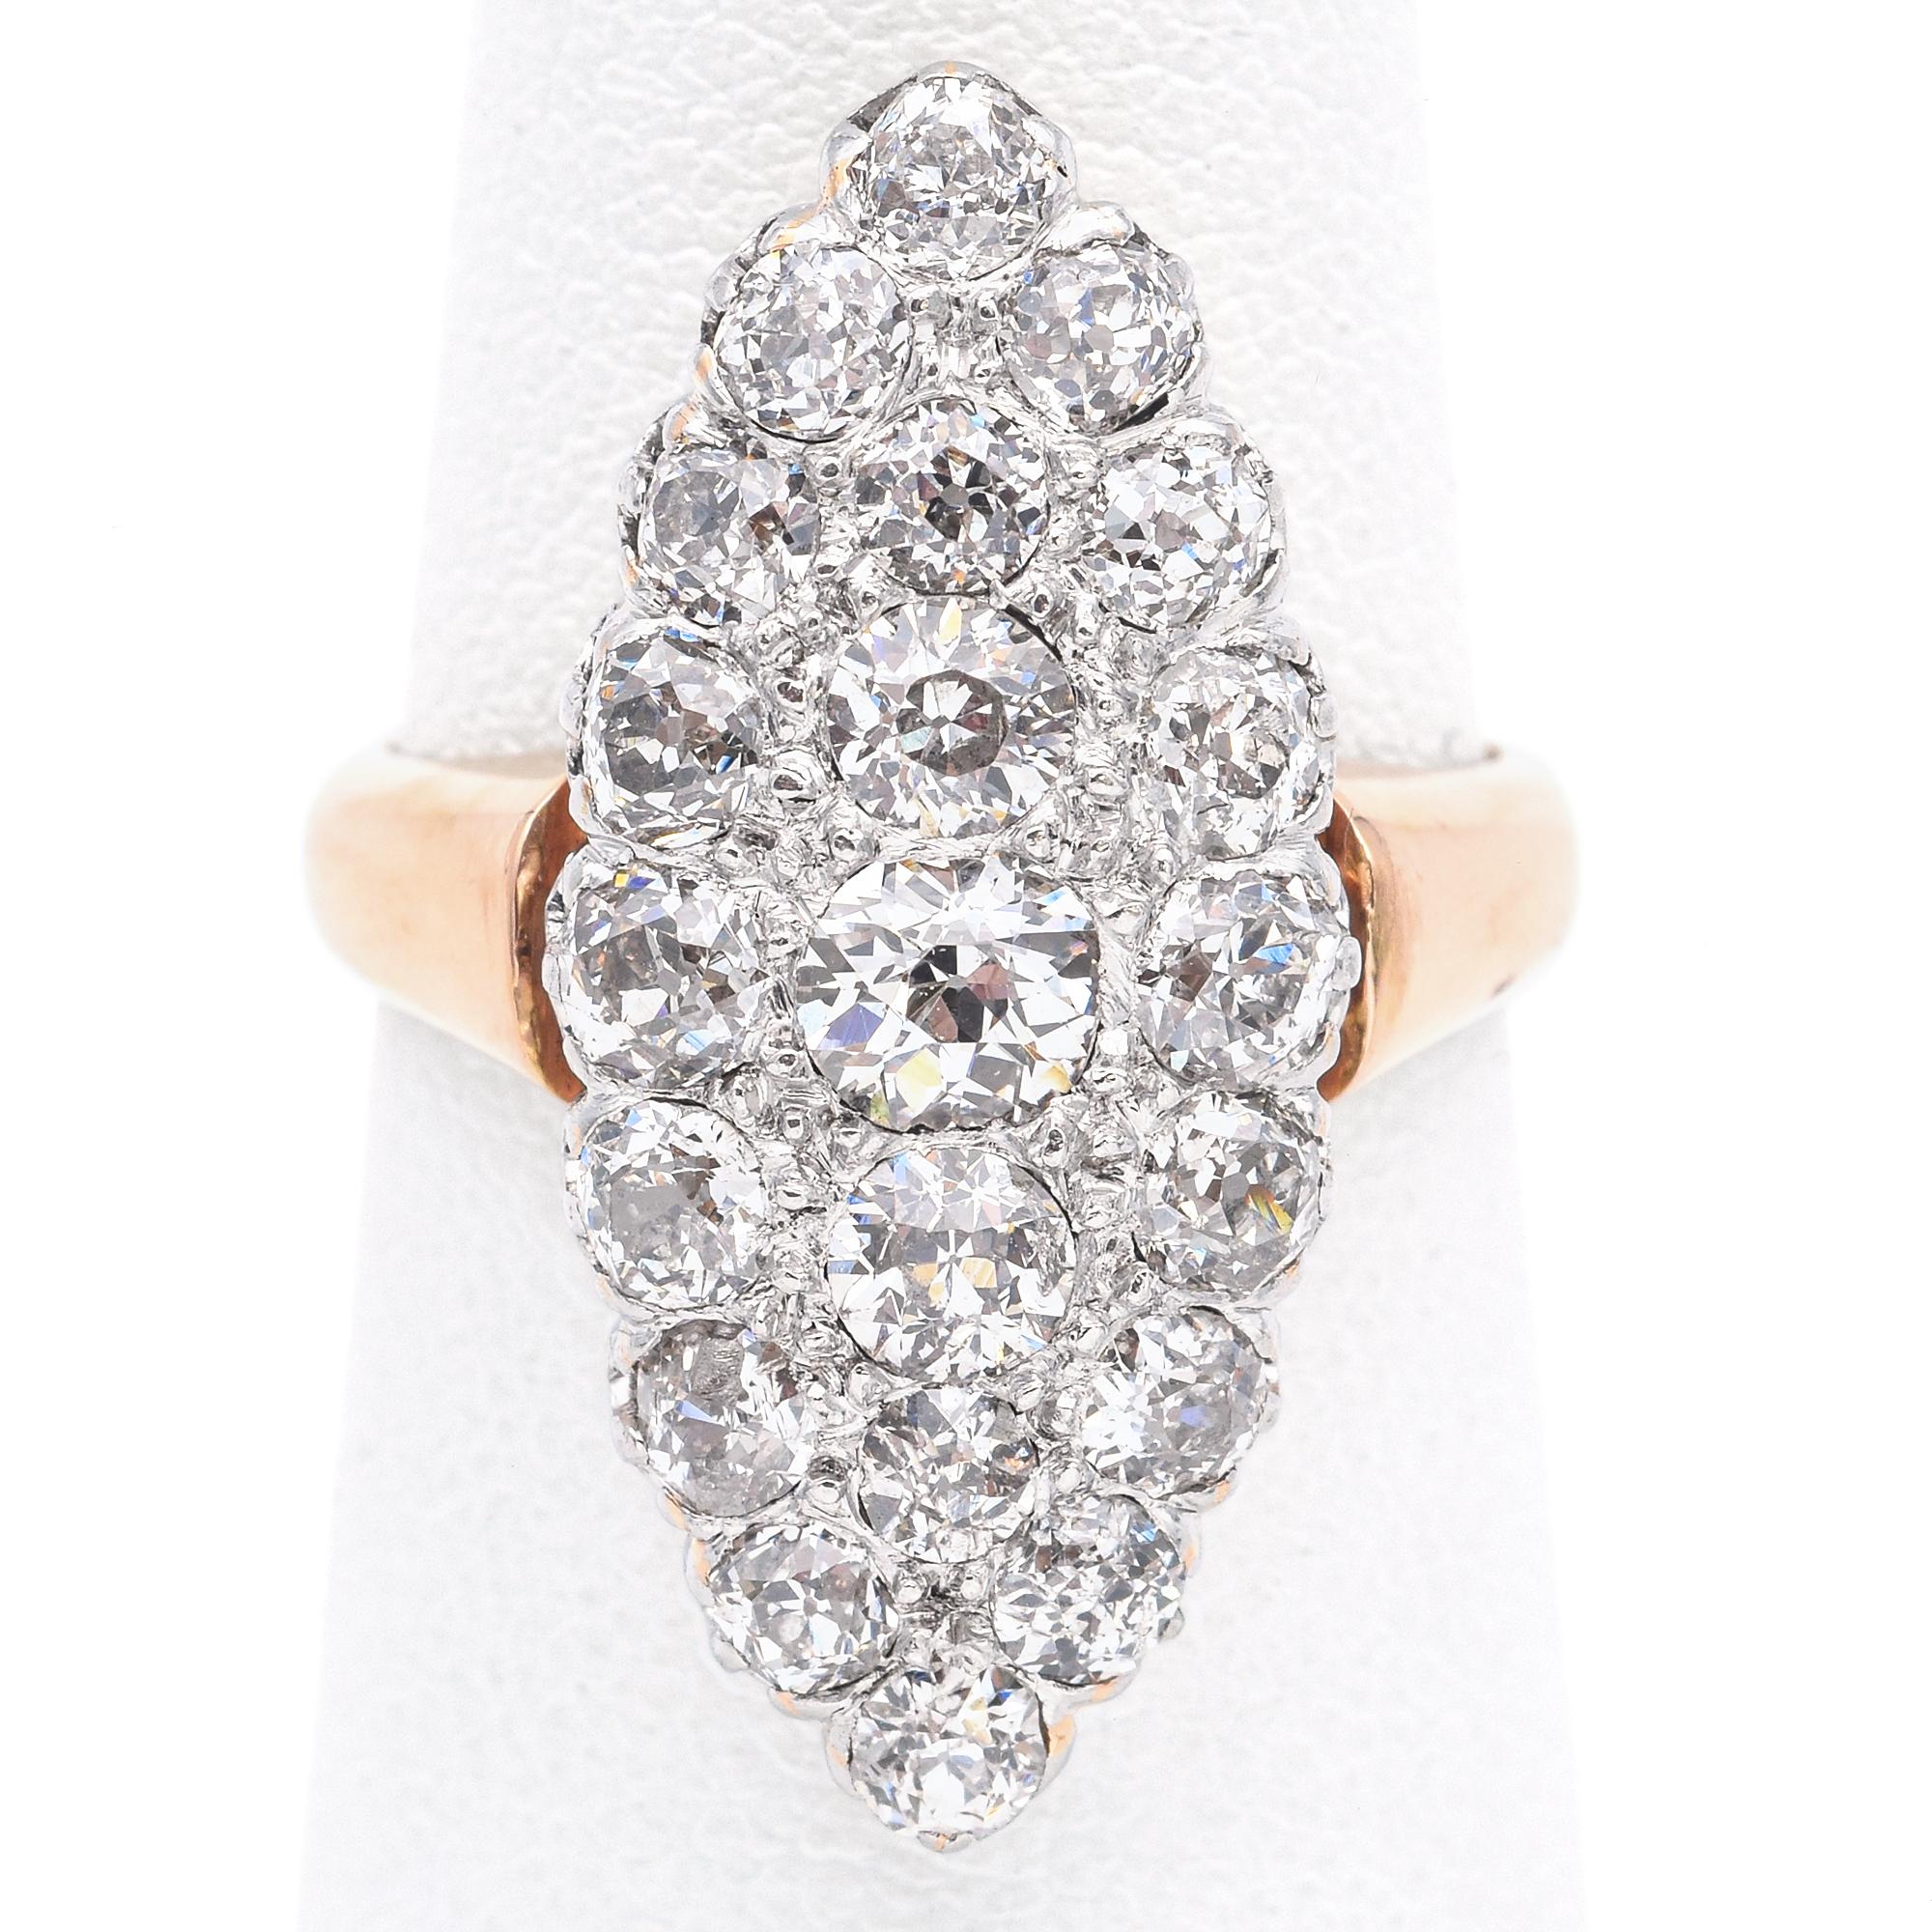 Ring is 18k gold, stone setting is platinum

Weight: 7.1 Grams
Stone: Approx. 2.09 TCW (0.08-0.25 Ct) Nice Old Cut Diamonds
Face of Ring: 24.7 x 11.2 x 5.2 mm
Ring Size: 5
Hallmark: Ring-18k gold tested, stone setting-platinum tested

Item #: